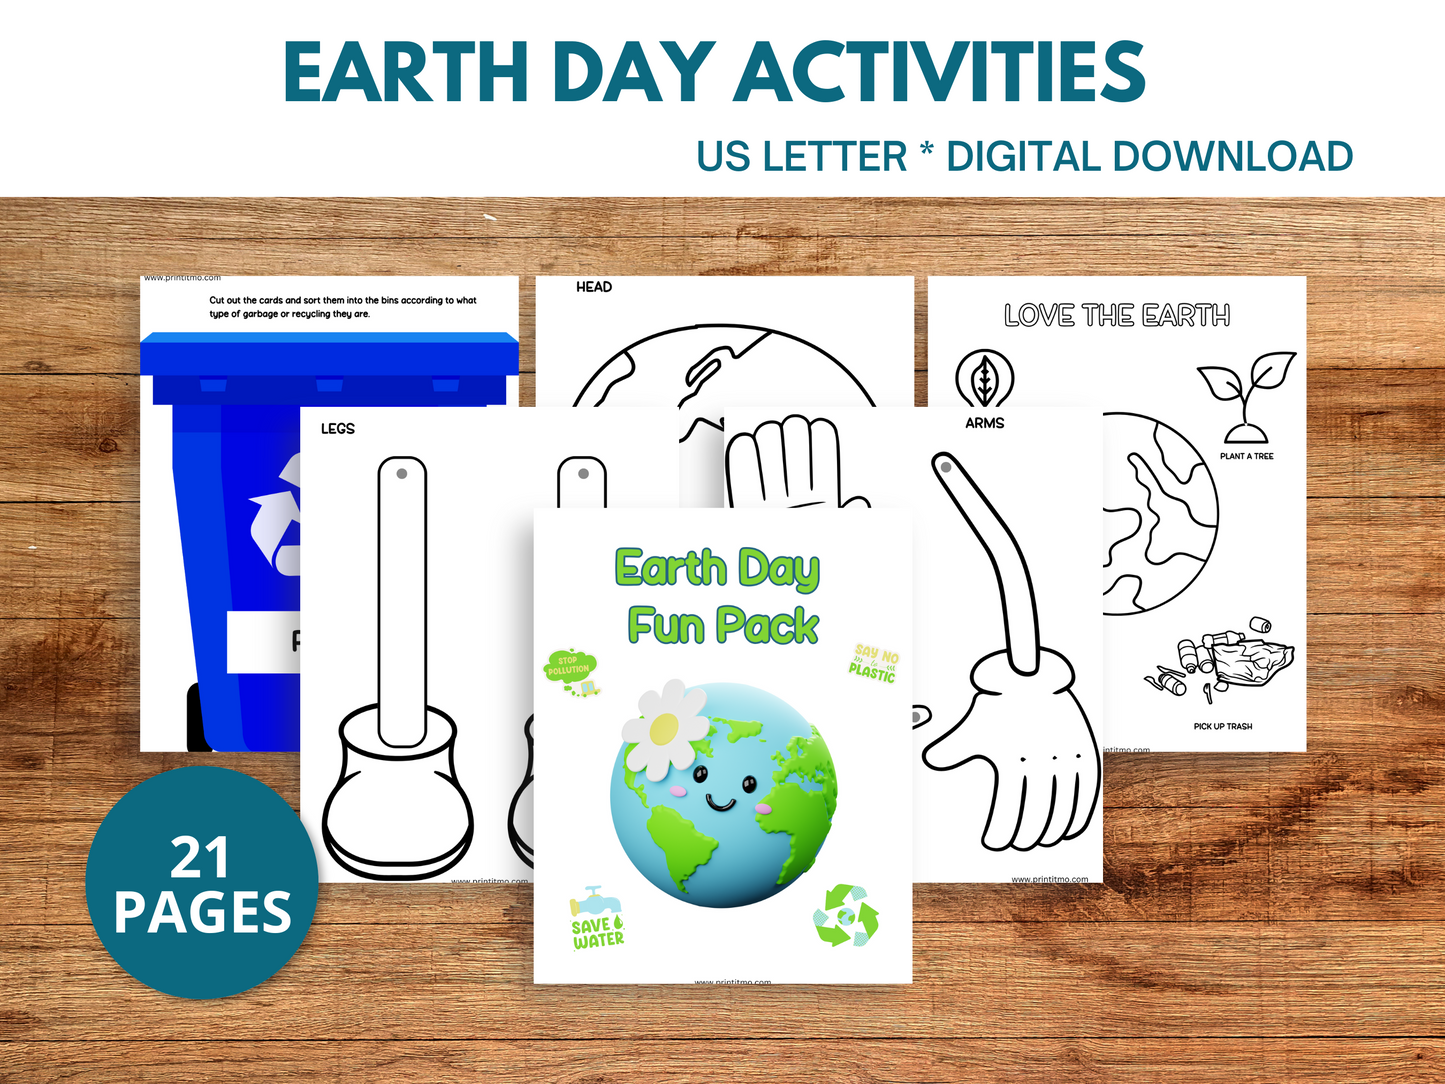 Earth Day Activities For kids